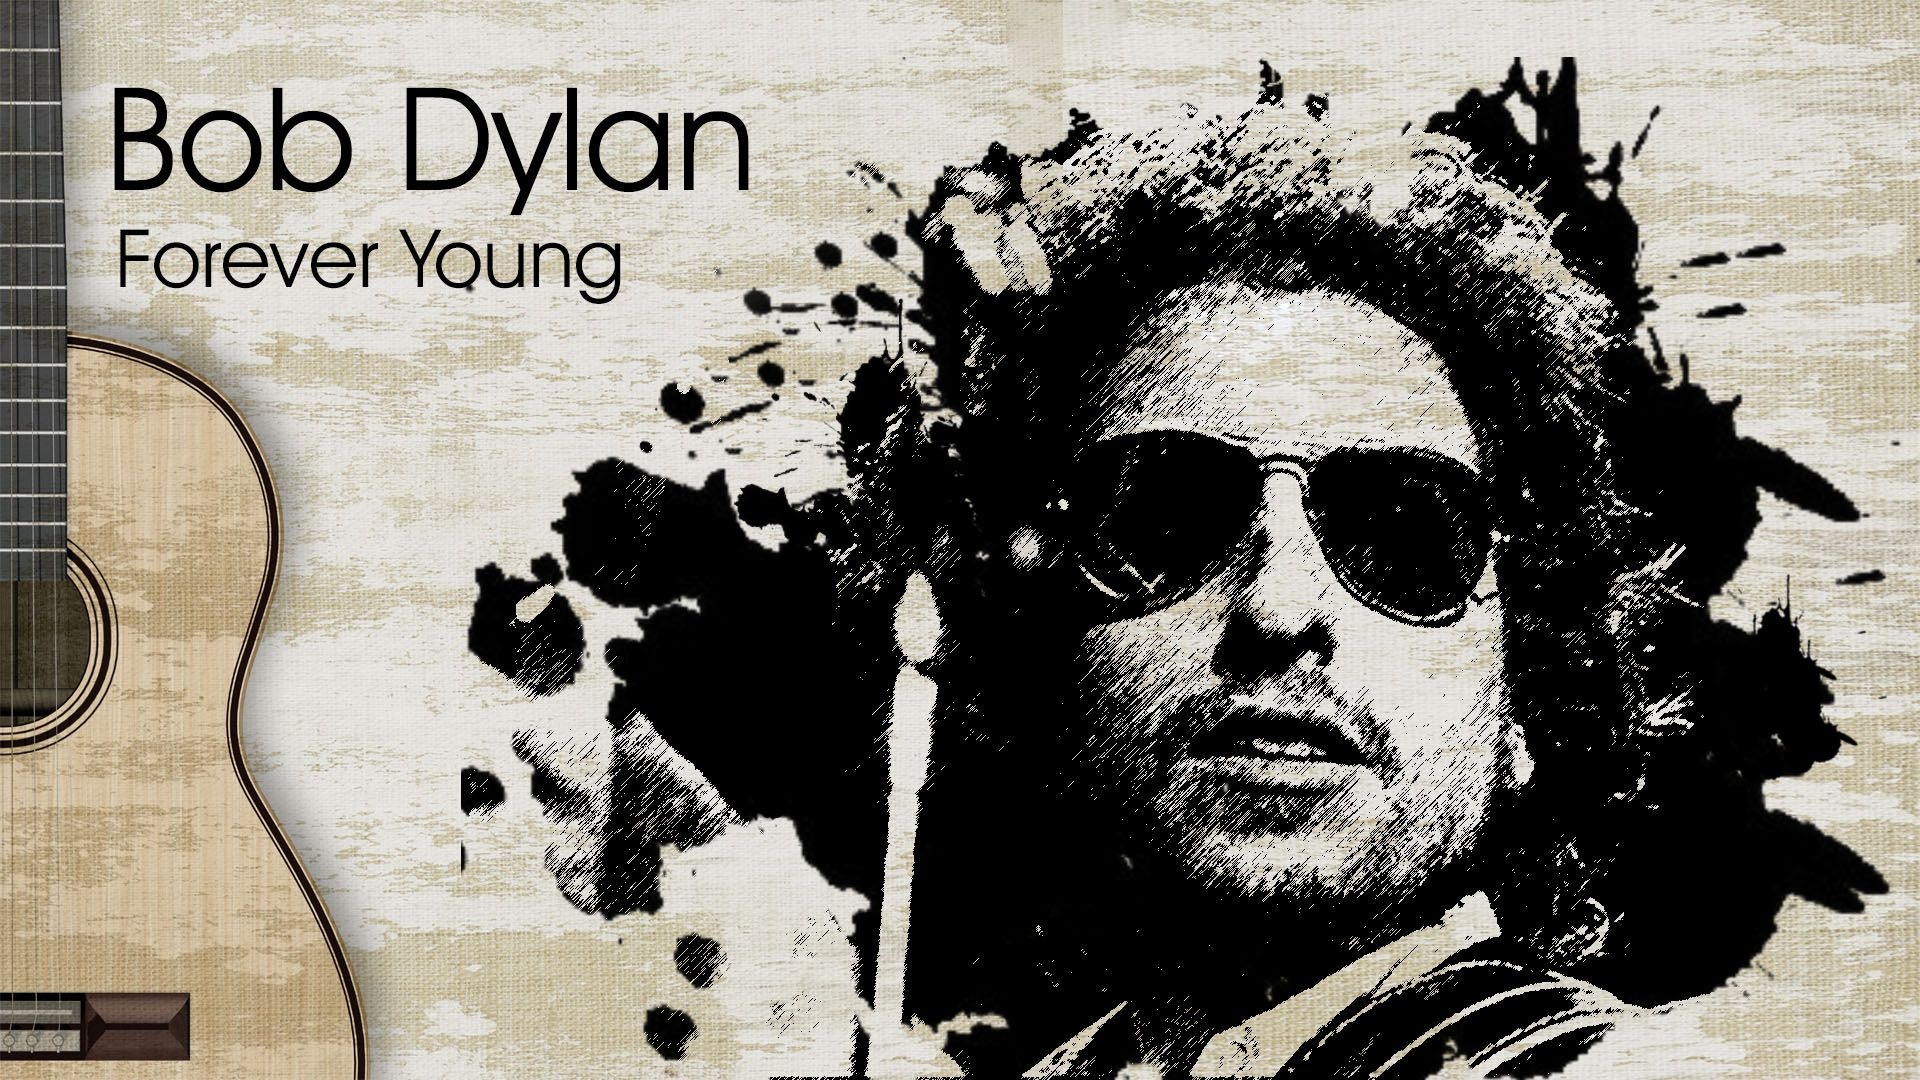 Bob Dylan: Dylan's 1974 release “Forever Young”, A number of covers including by Joan Baez and The Grateful Dead. 1920x1080 Full HD Wallpaper.